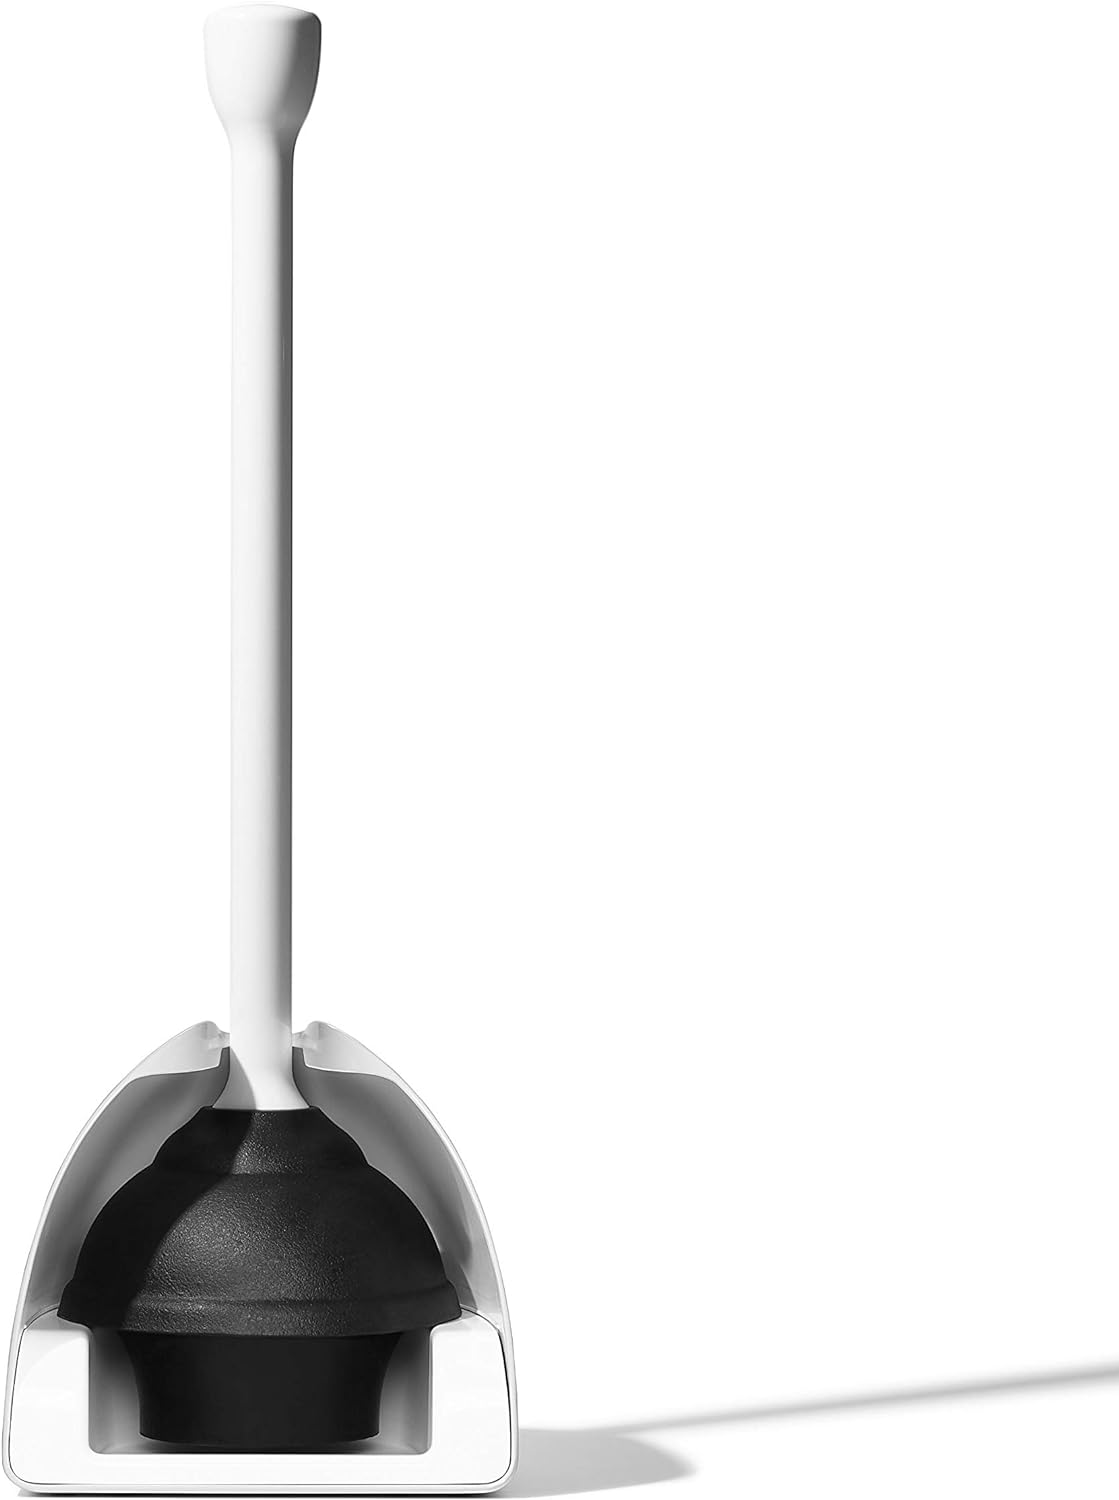 OXO Toilet Plunger with Cover, White